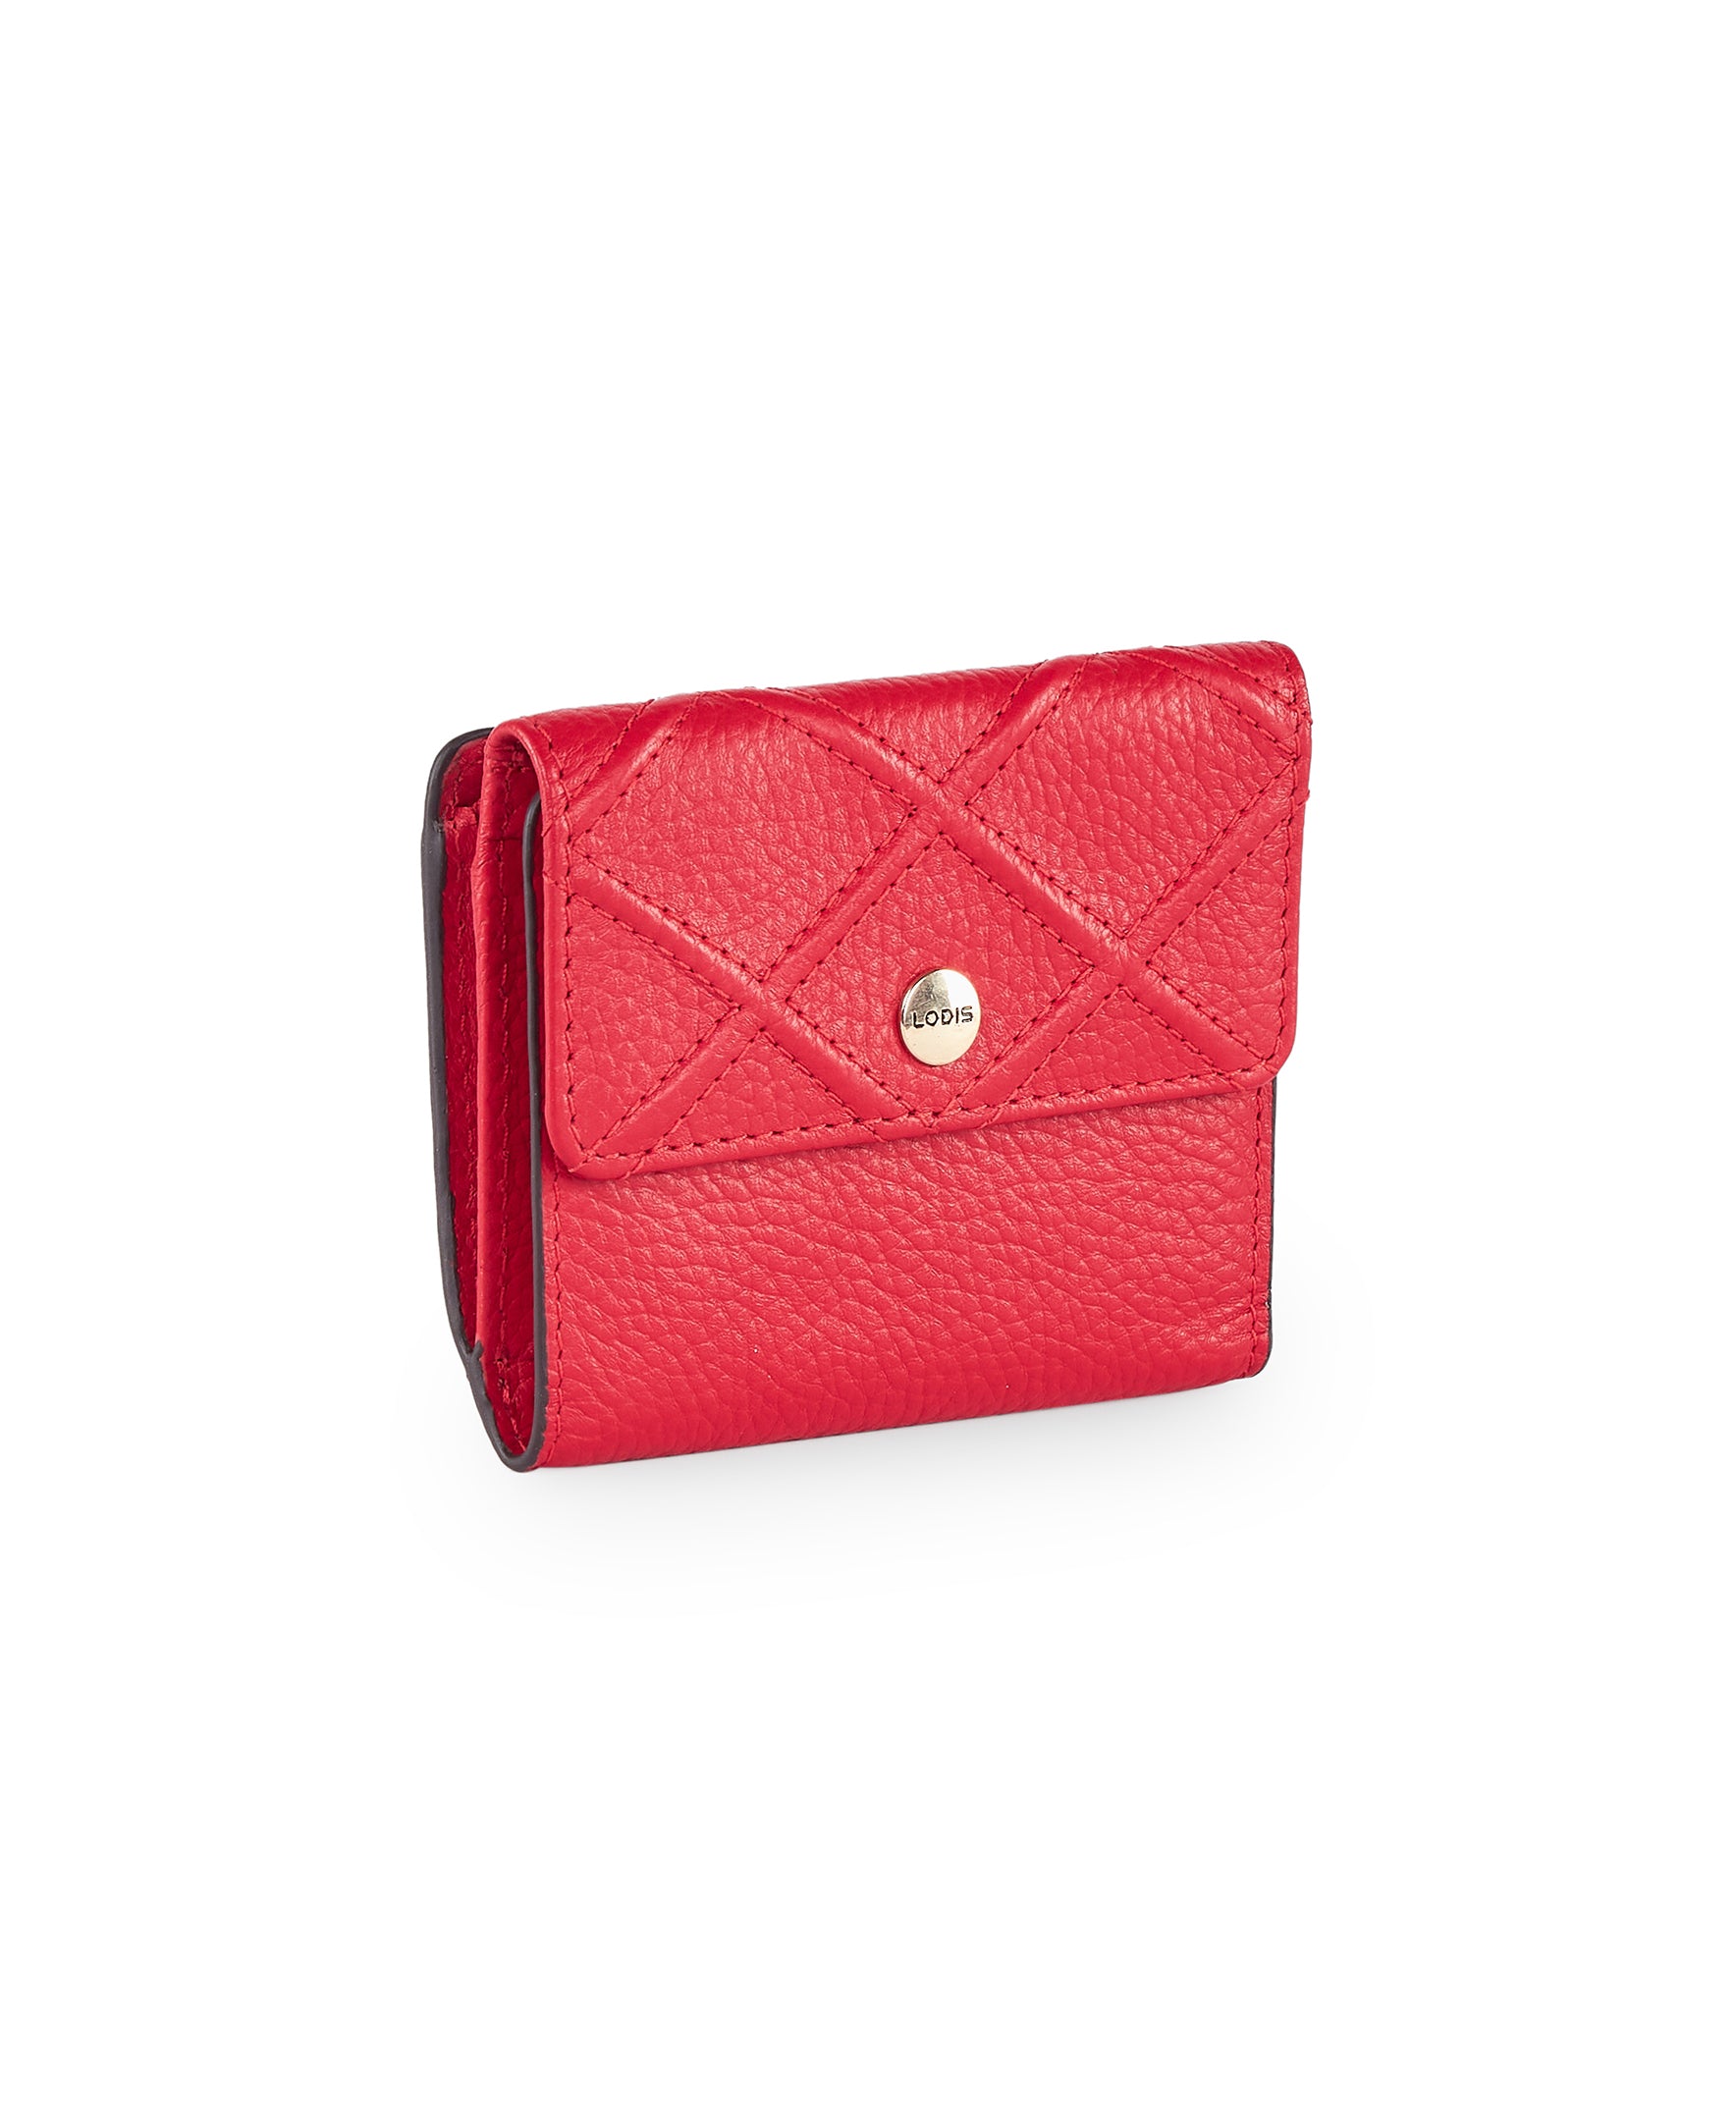 Shop now The Stylish French Purse with Quilted Diamond Flap | Lodis